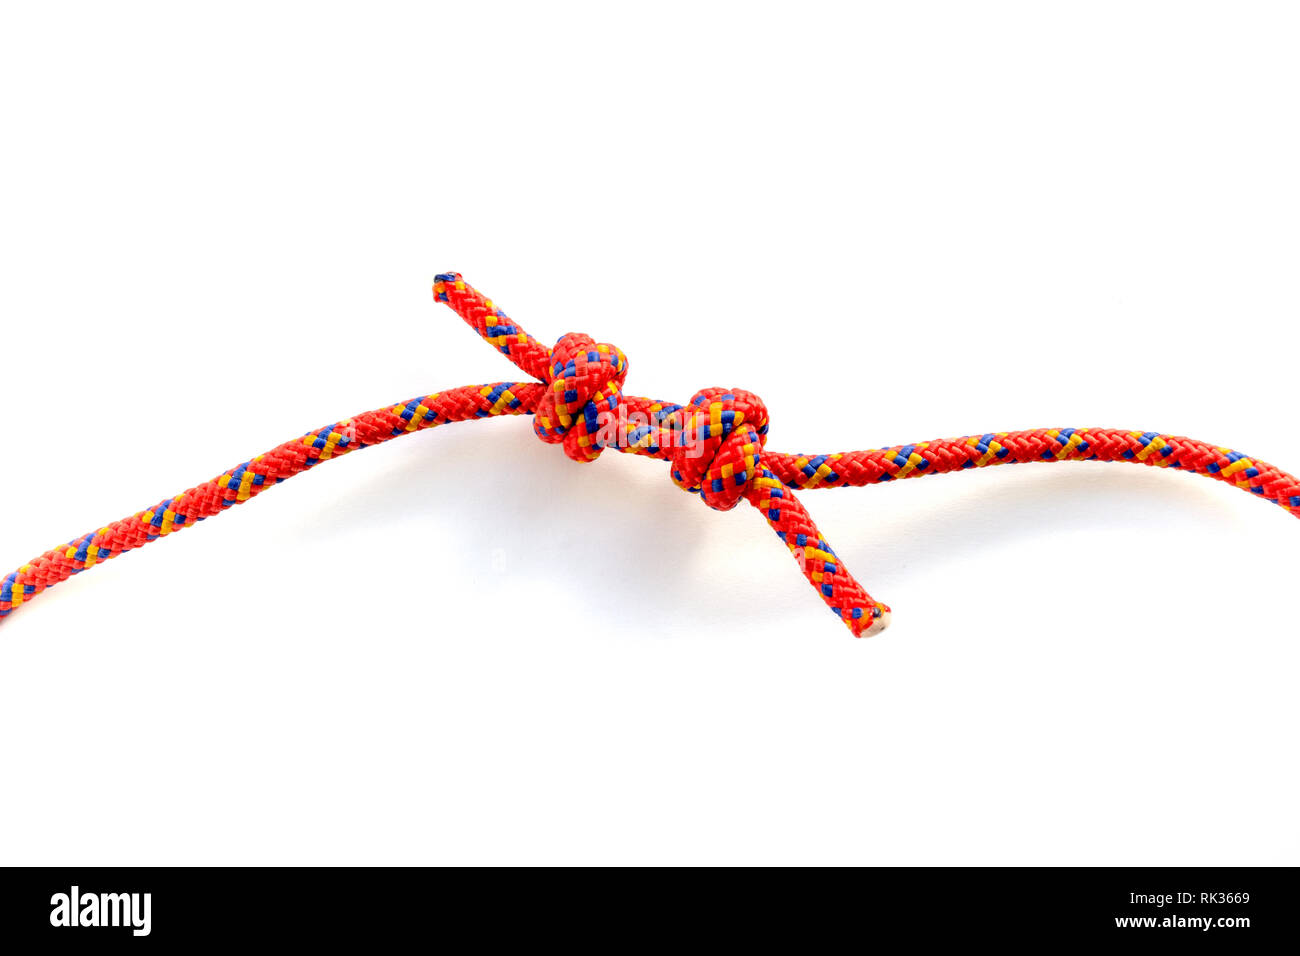 Forming a double fisherman's knot to join two ropes together. Closeup of the two knots being joined by pulling the rope strings apart. Red rope with b Stock Photo